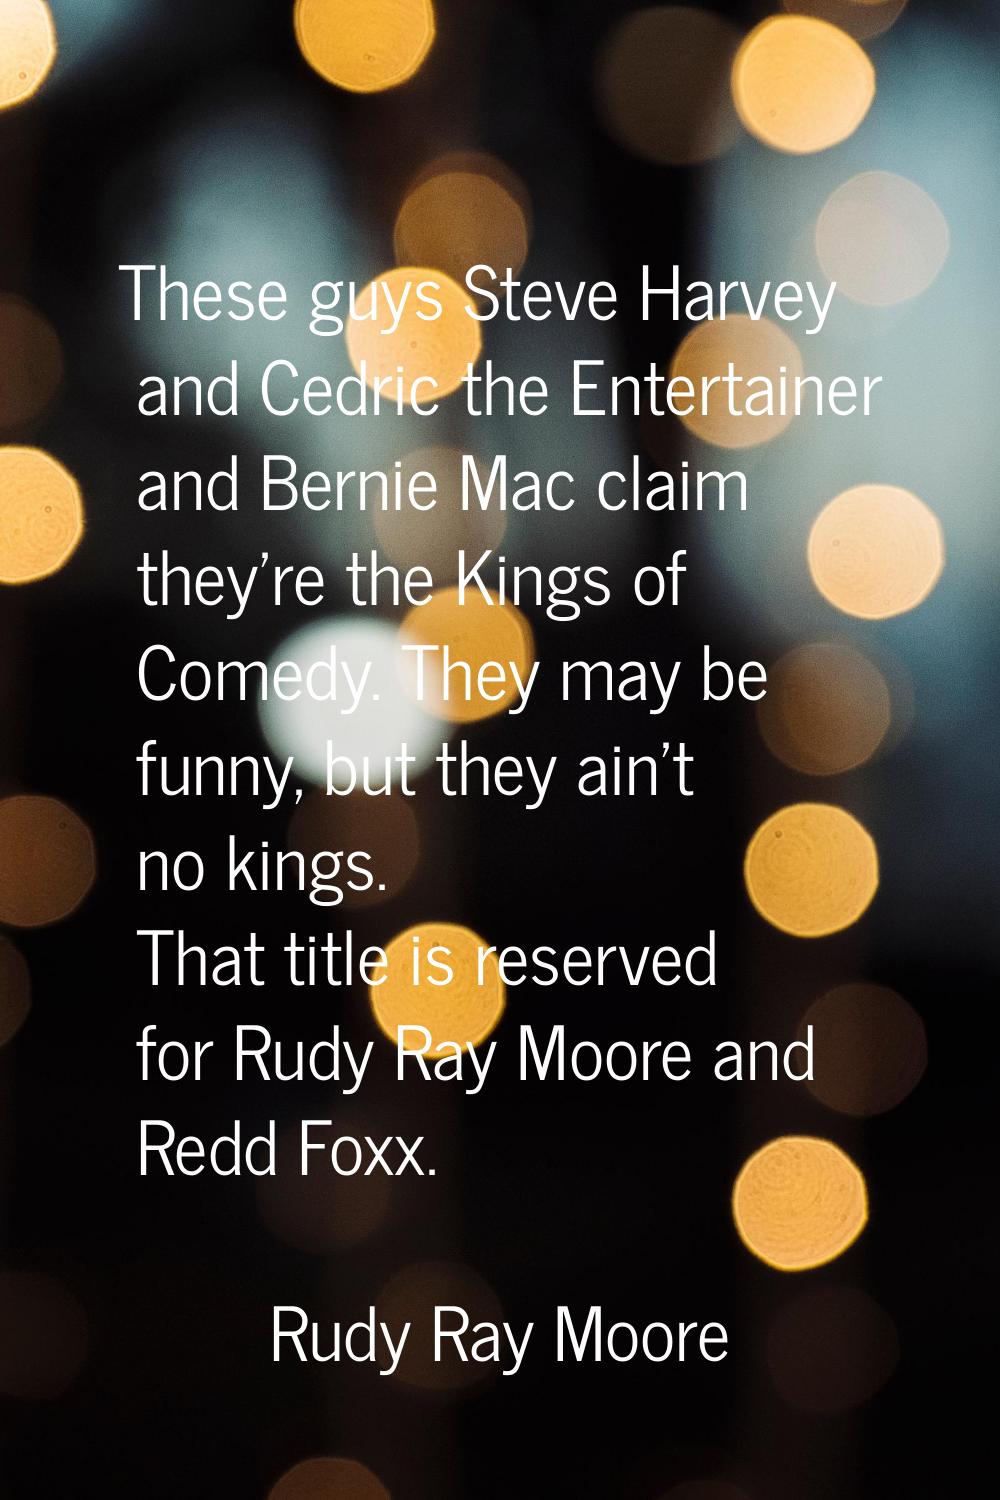 These guys Steve Harvey and Cedric the Entertainer and Bernie Mac claim they're the Kings of Comedy